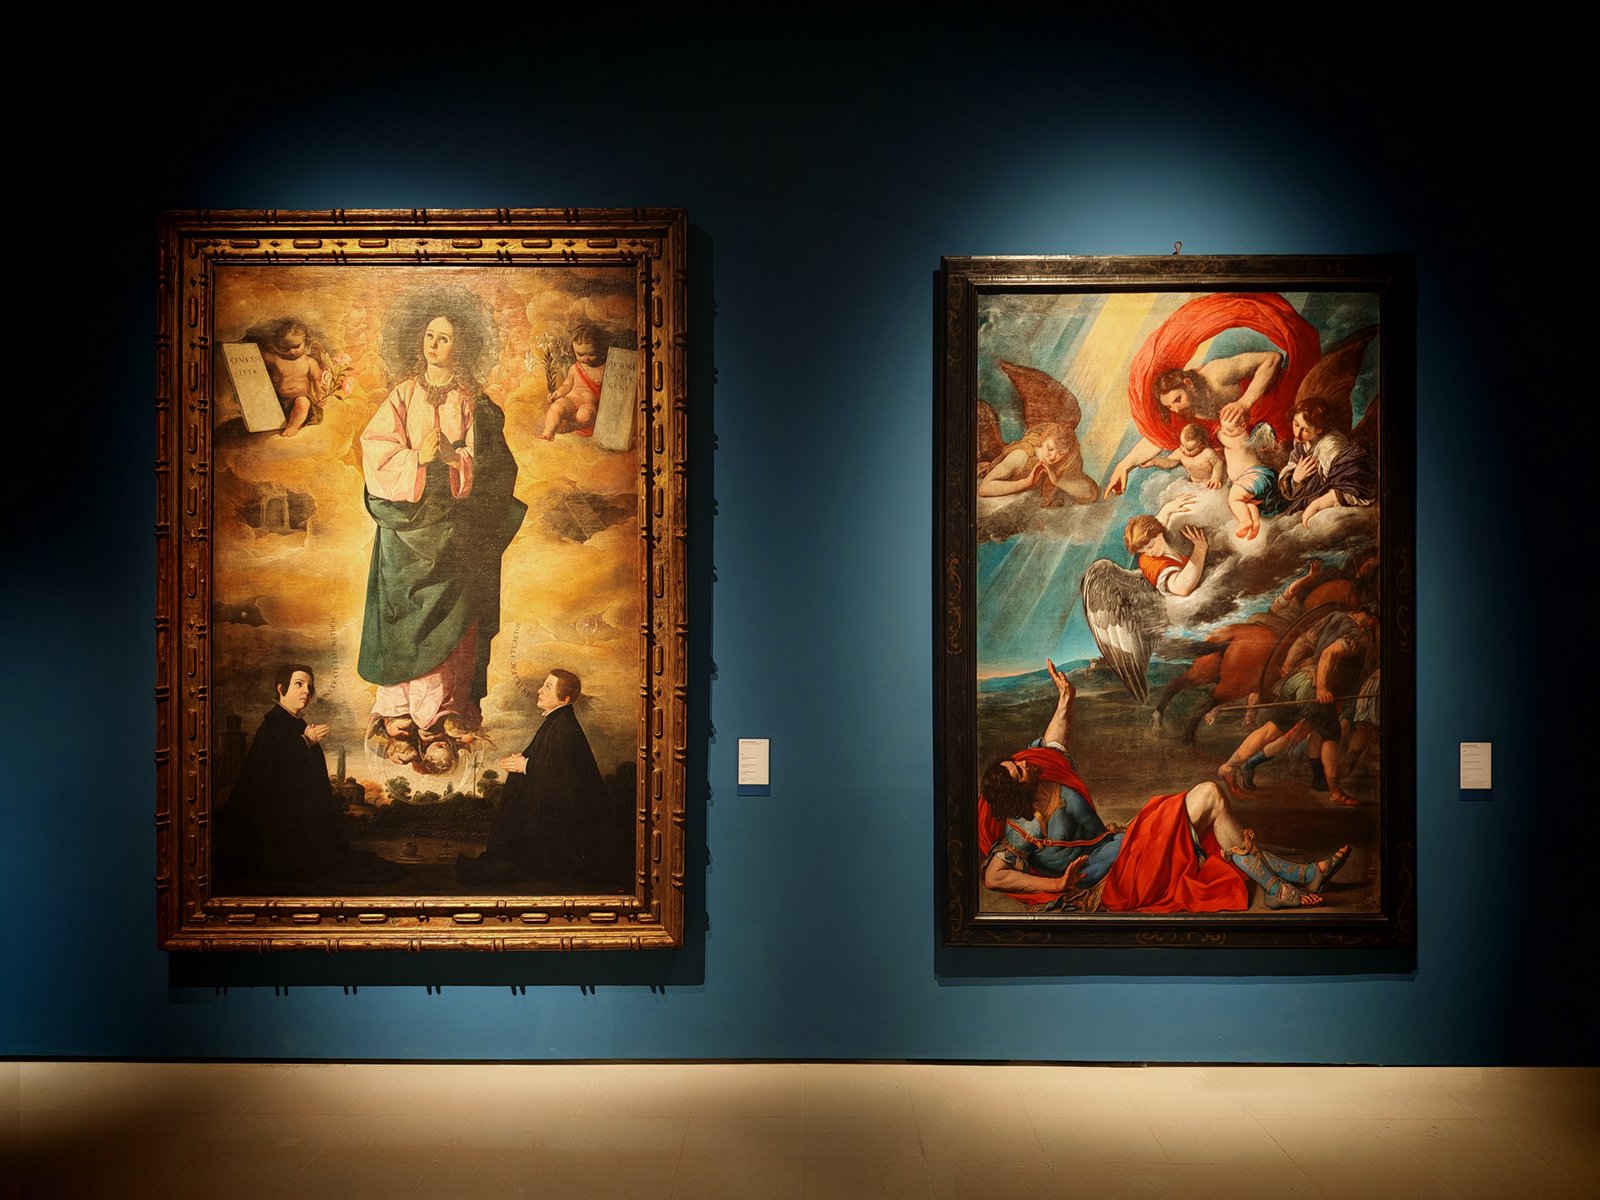 Two large framed paintings displayed on a dark blue wall in a gallery, one depicting a saint adorned in green with onlookers, and the other showing a dramatic religious scene with vibrant colors.